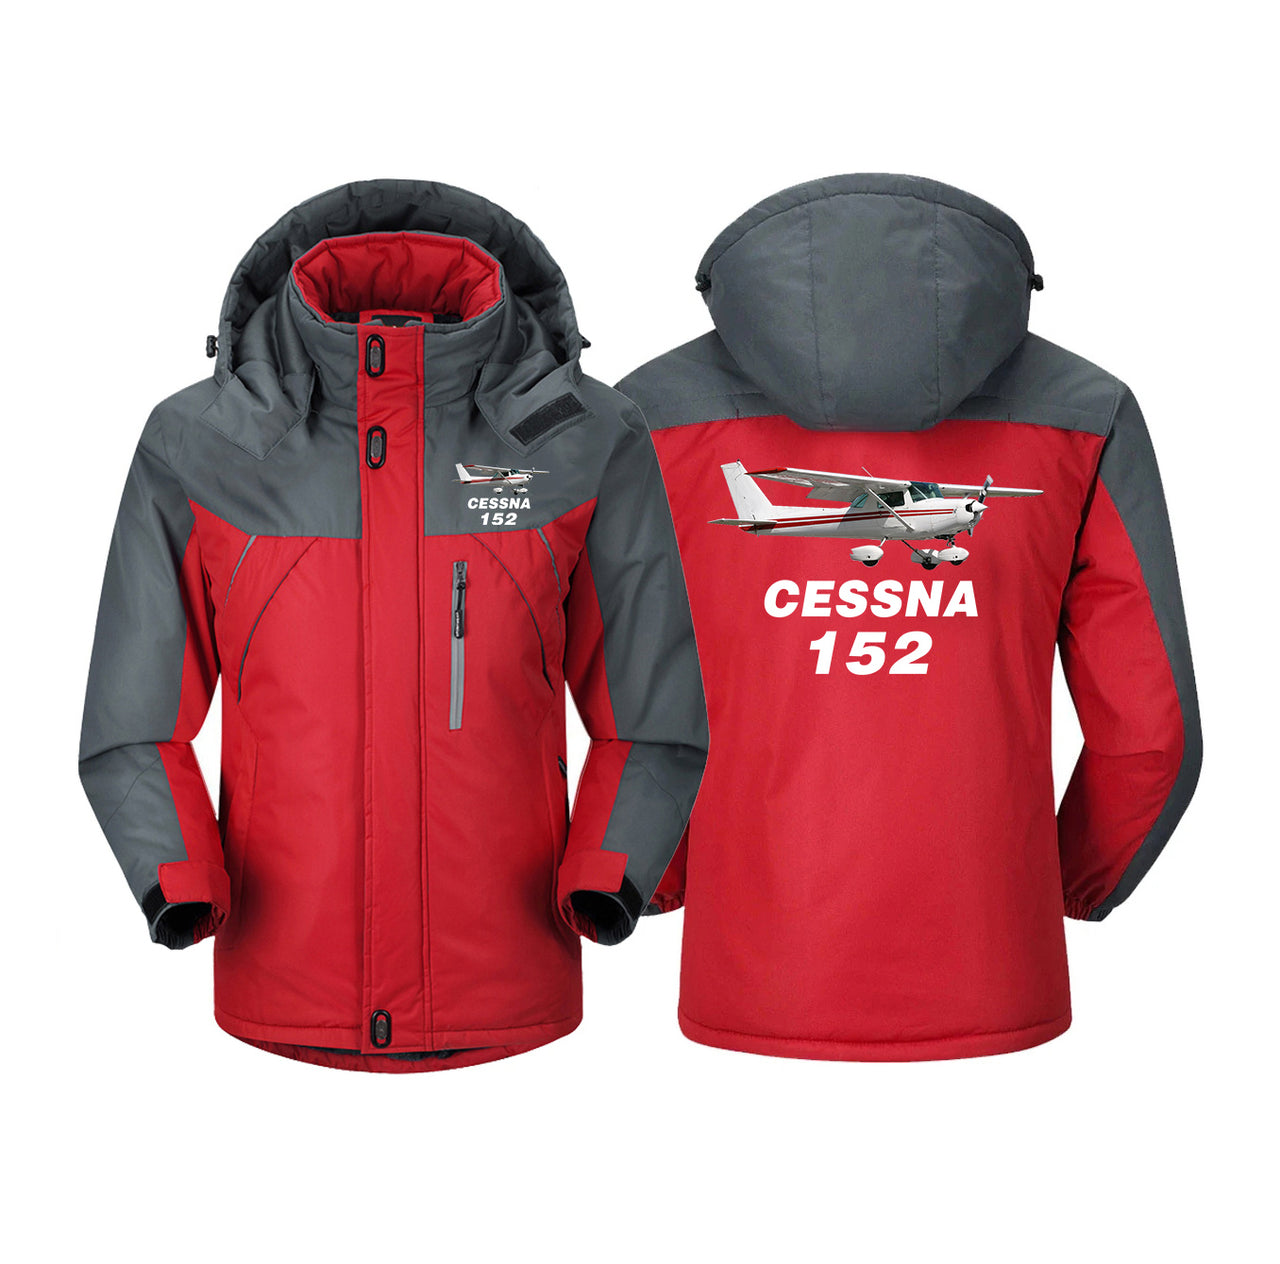 The Cessna 152 Designed Thick Winter Jackets